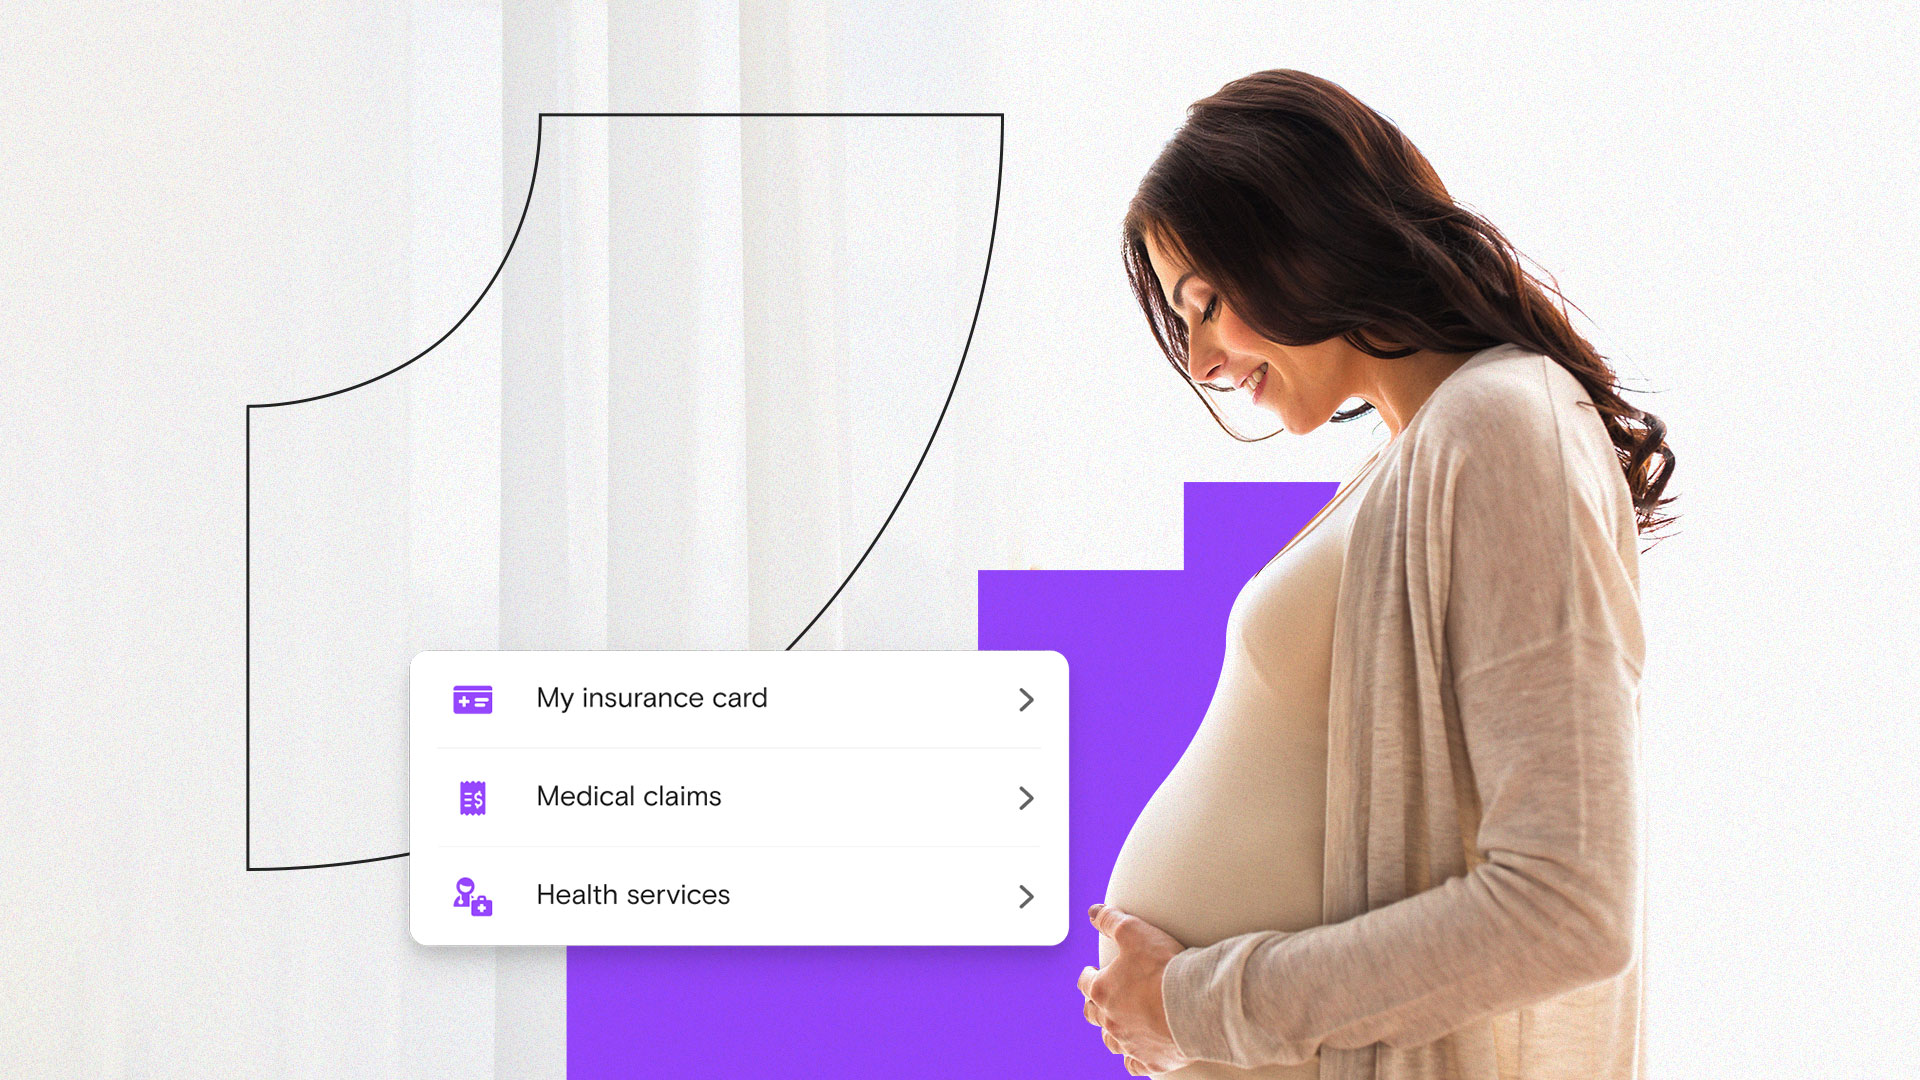 https://www.bayzat.com/blog/wp-content/uploads/2020/05/Everything-you-need-to-know-on-maternity-cover-in-UAE-during-this-time.jpg